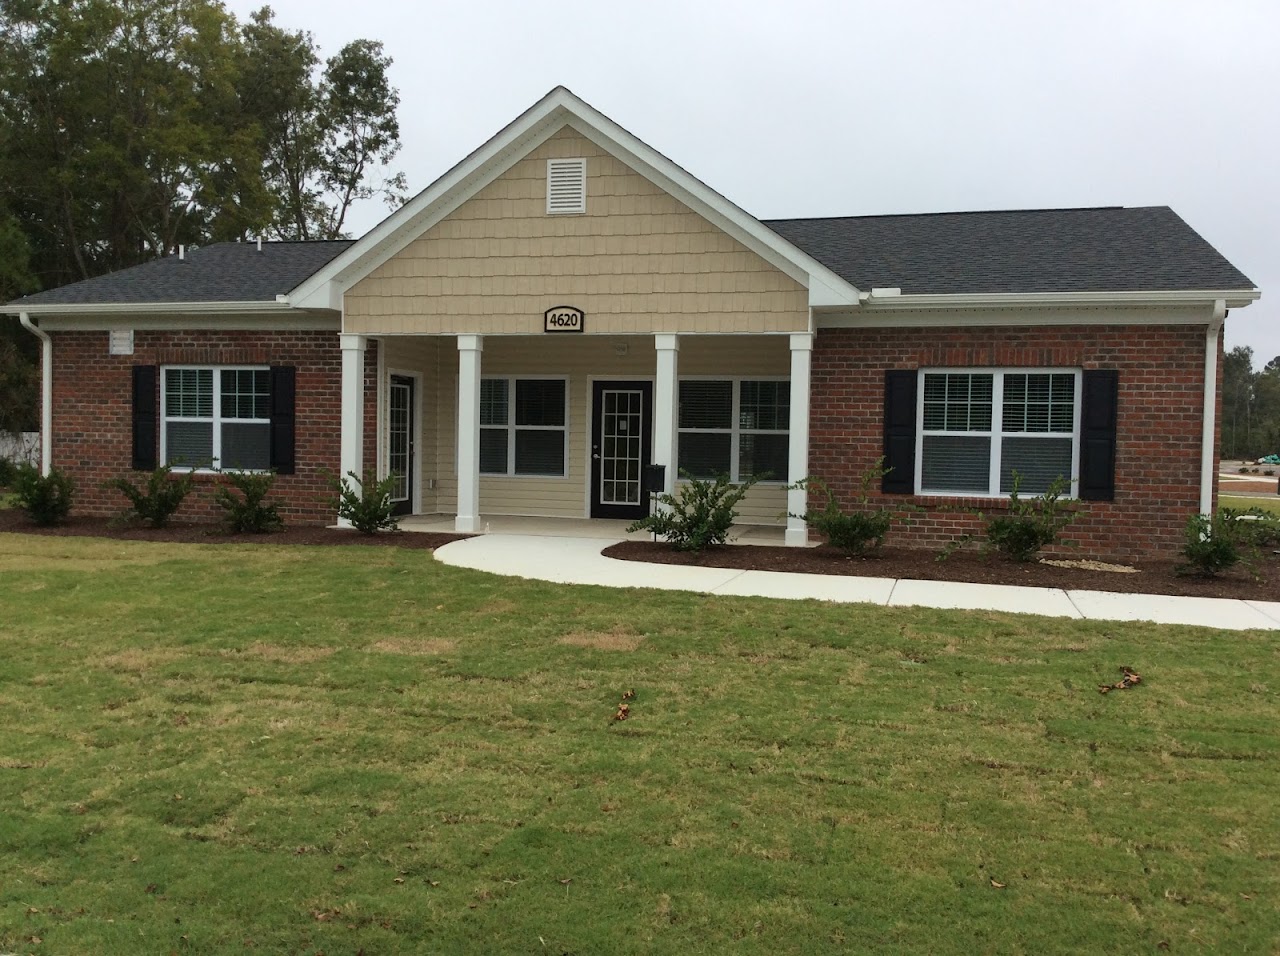 Photo of RIVER POINTE at 4620 WHITE STREET SHALLOTTE, NC 28470